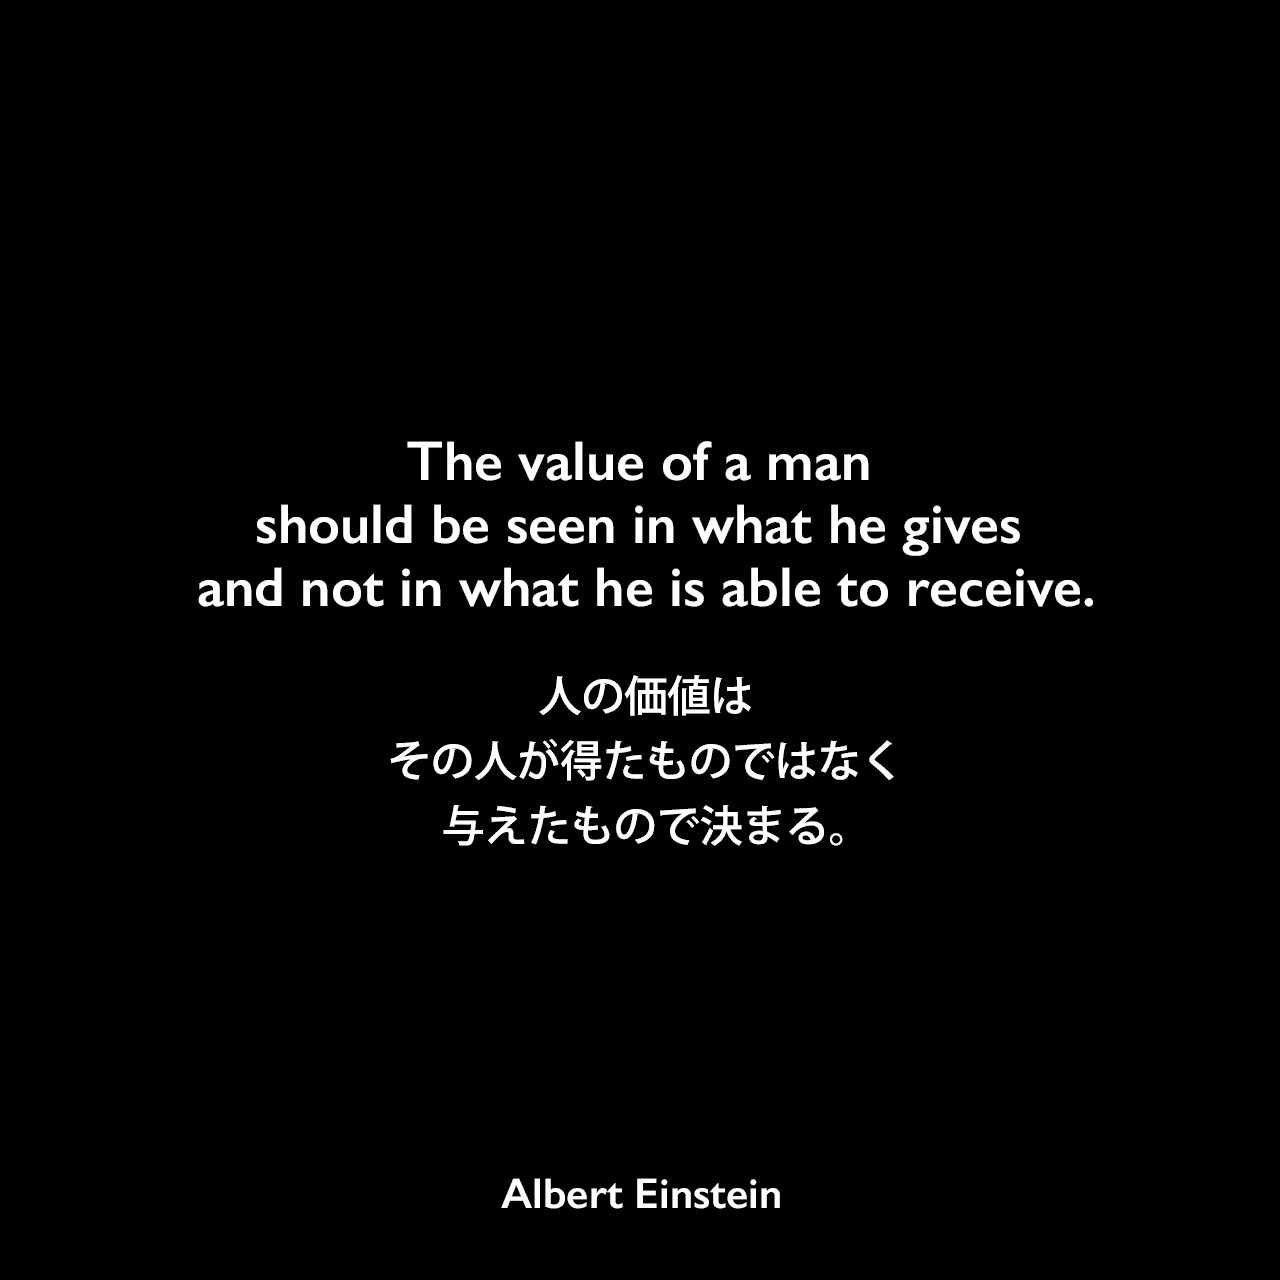 The value of a man should be seen in what he gives and not in what he is able to receive.人の価値は、その人が得たものではなく、与えたもので決まる。Albert Einstein